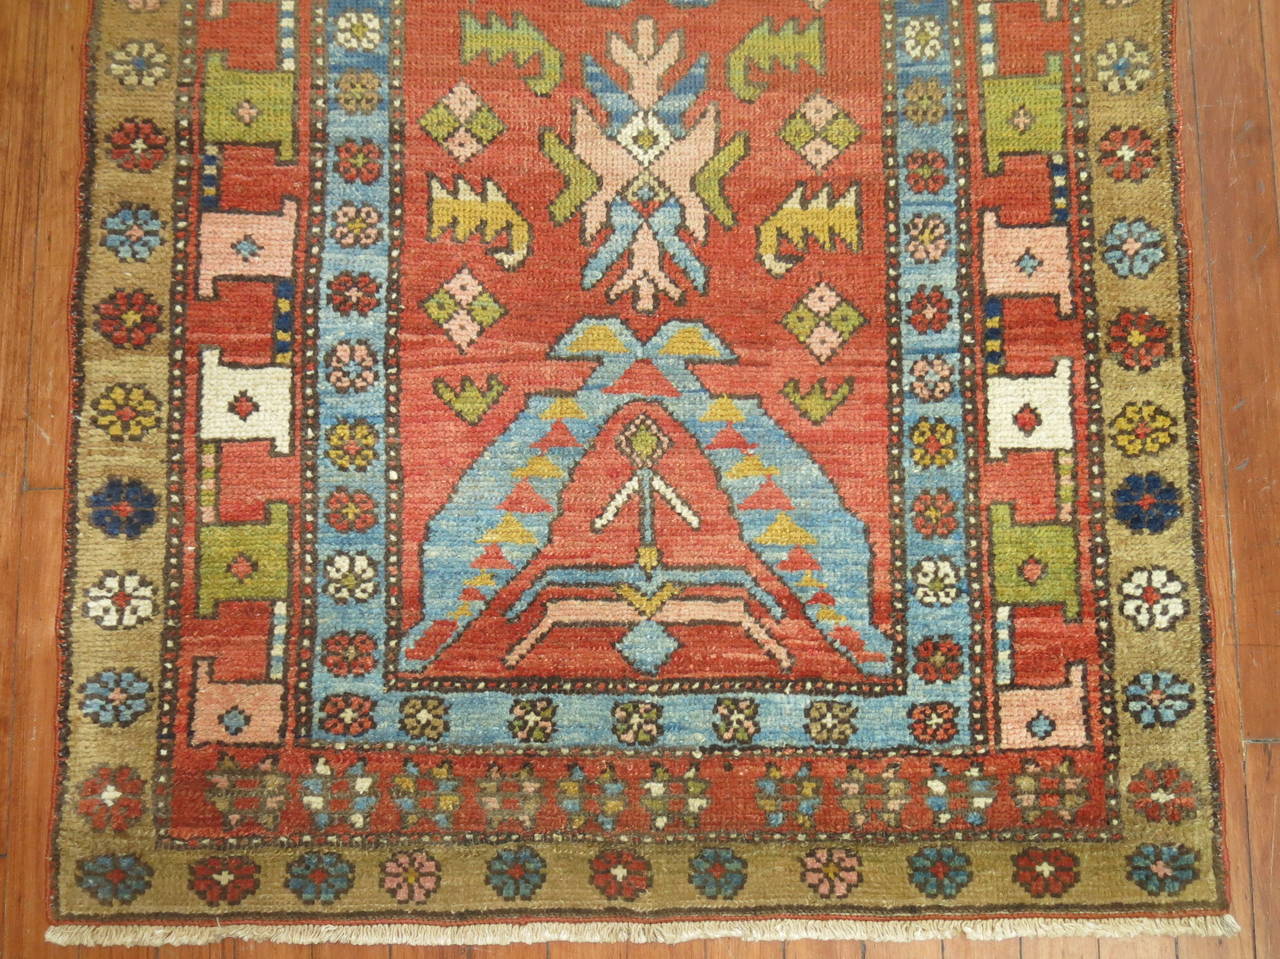 Hand-Knotted Tribal Antique Bakshaish Foot Rug from Northwest Persia